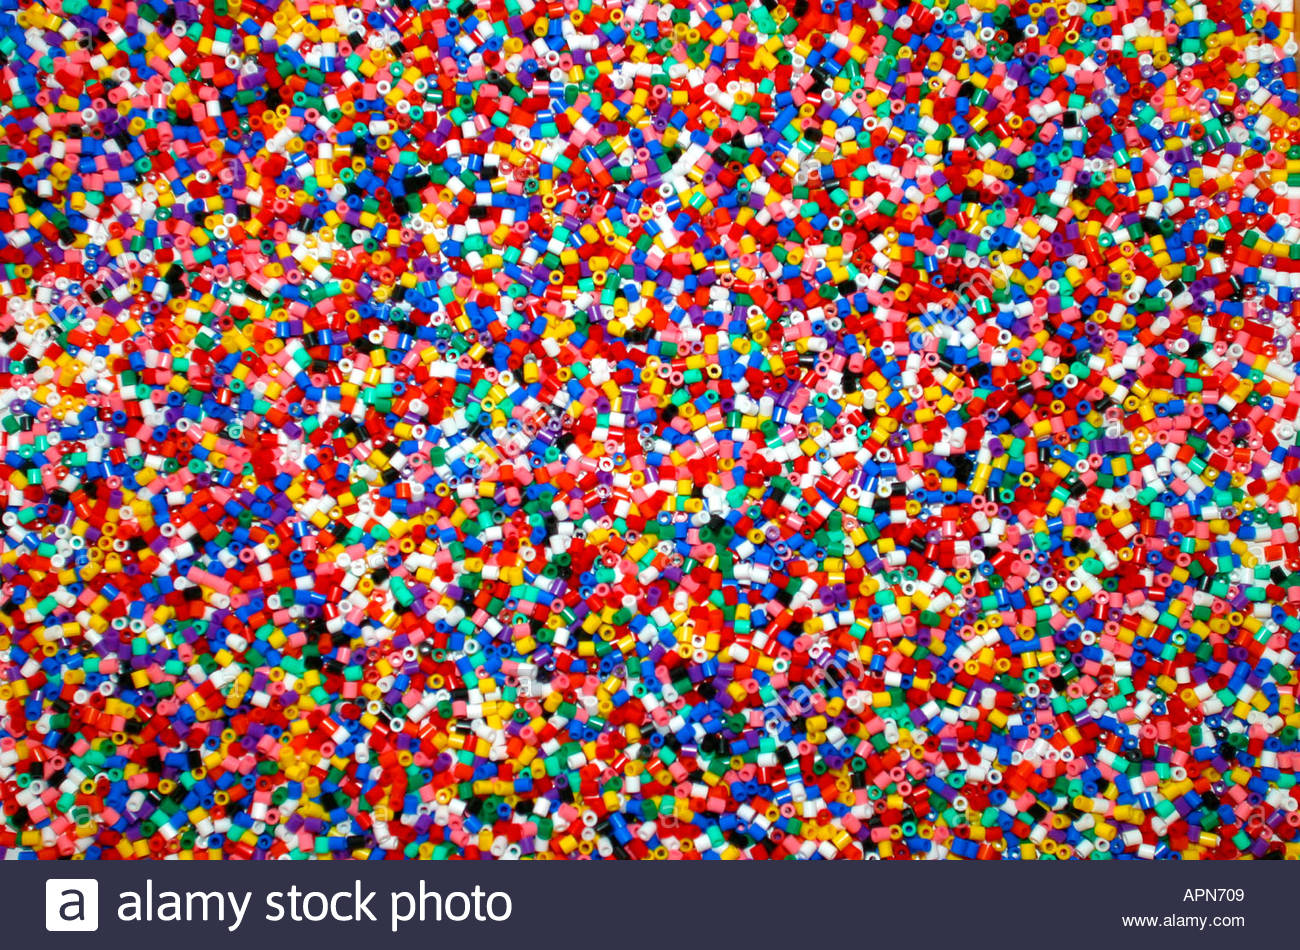 Backgrounds Rainbow Colored Beads Make Colorful Pattern Stock